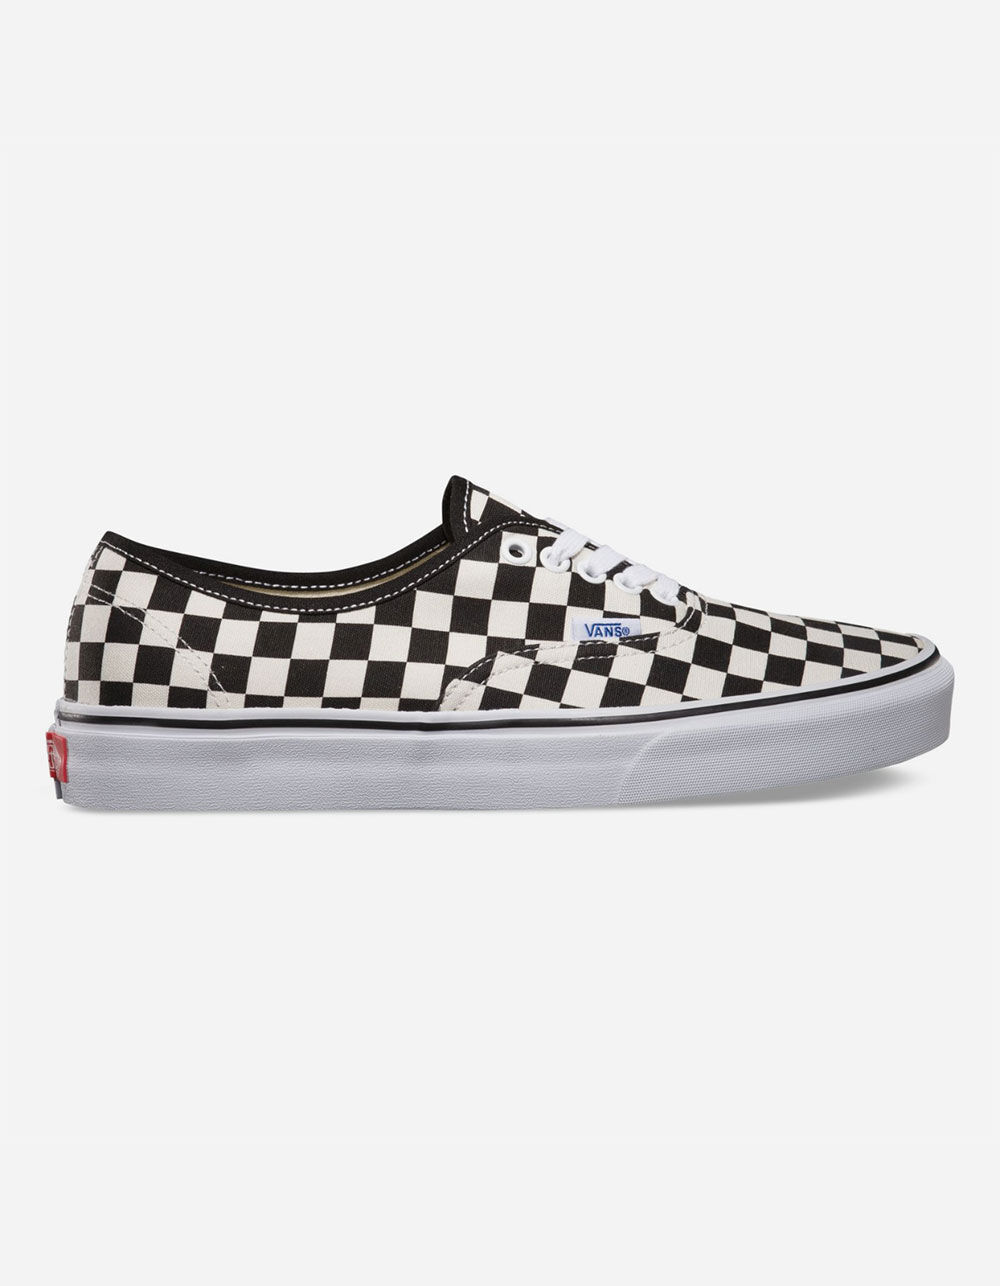 VANS Authentic Golden Coast Checkerboard Shoes image number 0